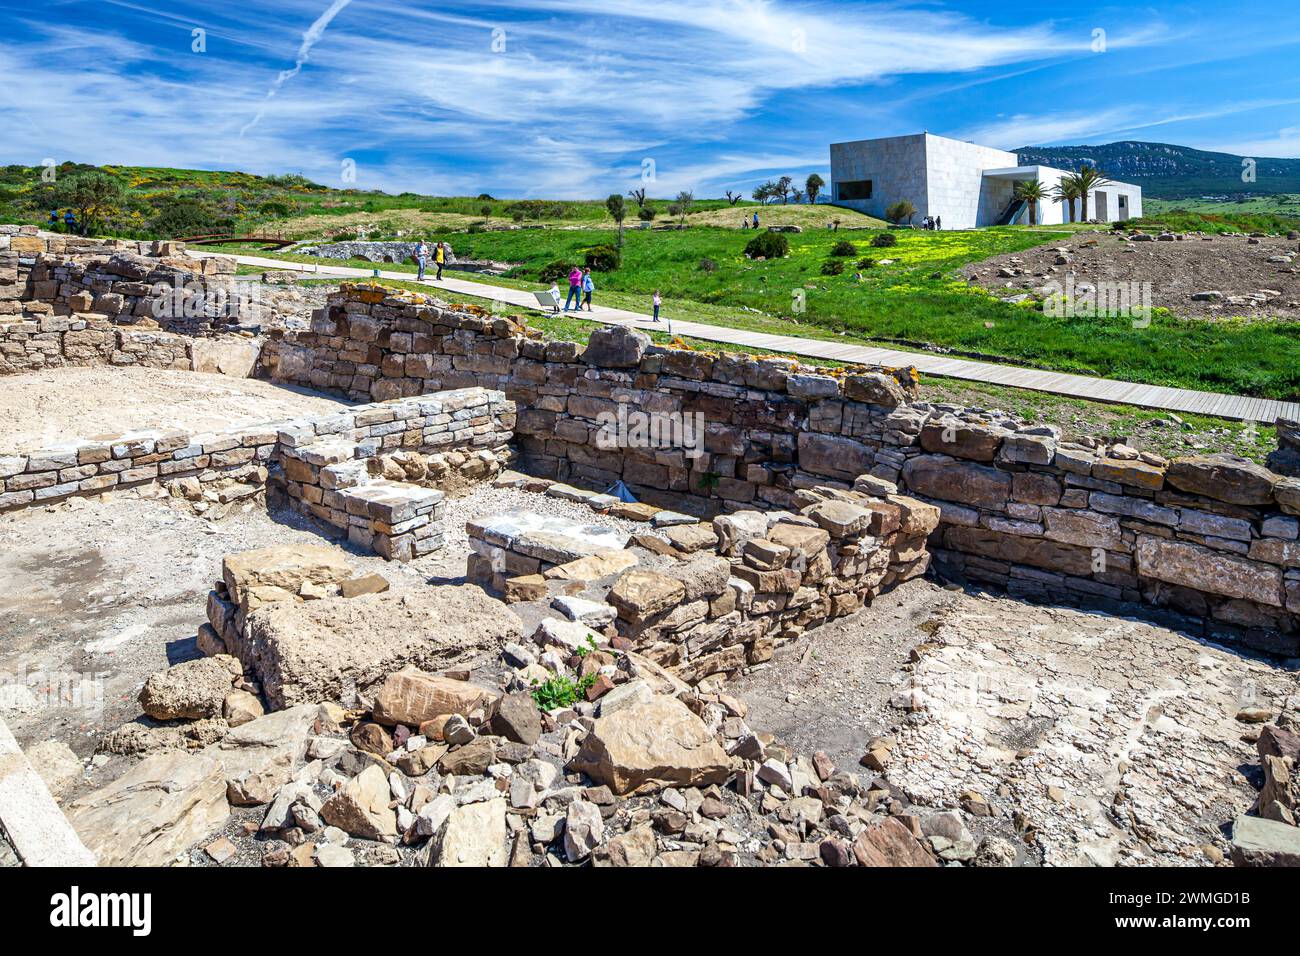 This image captures the ancient ruins of the Baelo Claudia archaeological site in the foreground with visitors exploring its historical wonders. In th Stock Photo